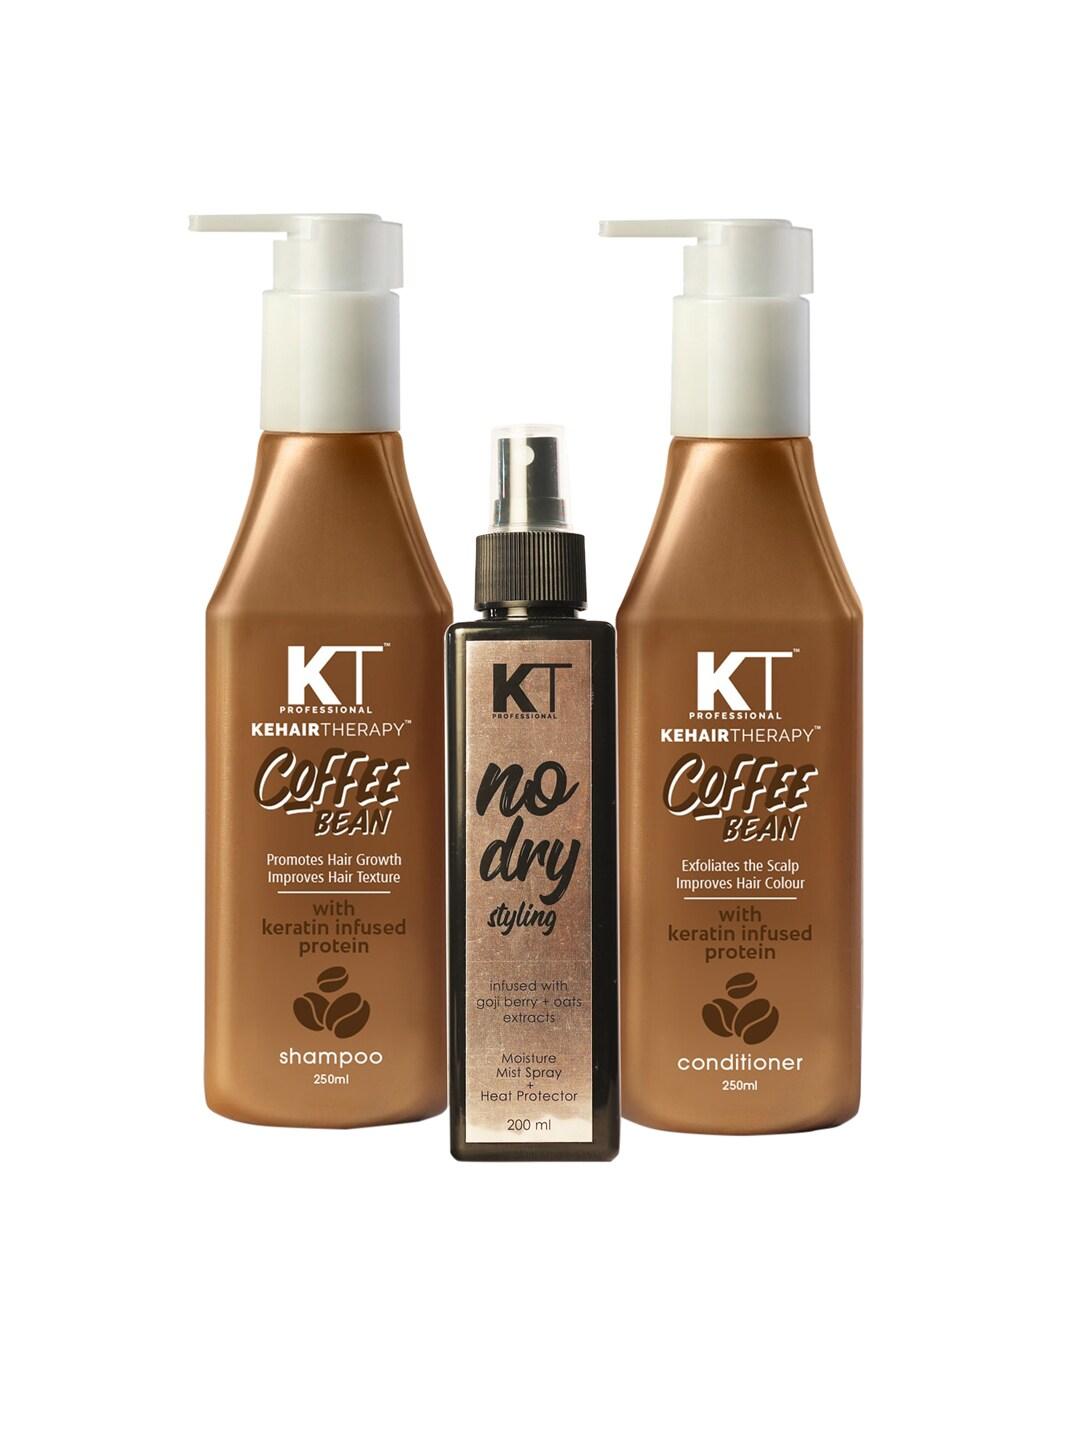 KEHAIRTHERAPY Pack Of 3 Coffee Bean Shampoo & Conditioner With No Dry Hair Spray